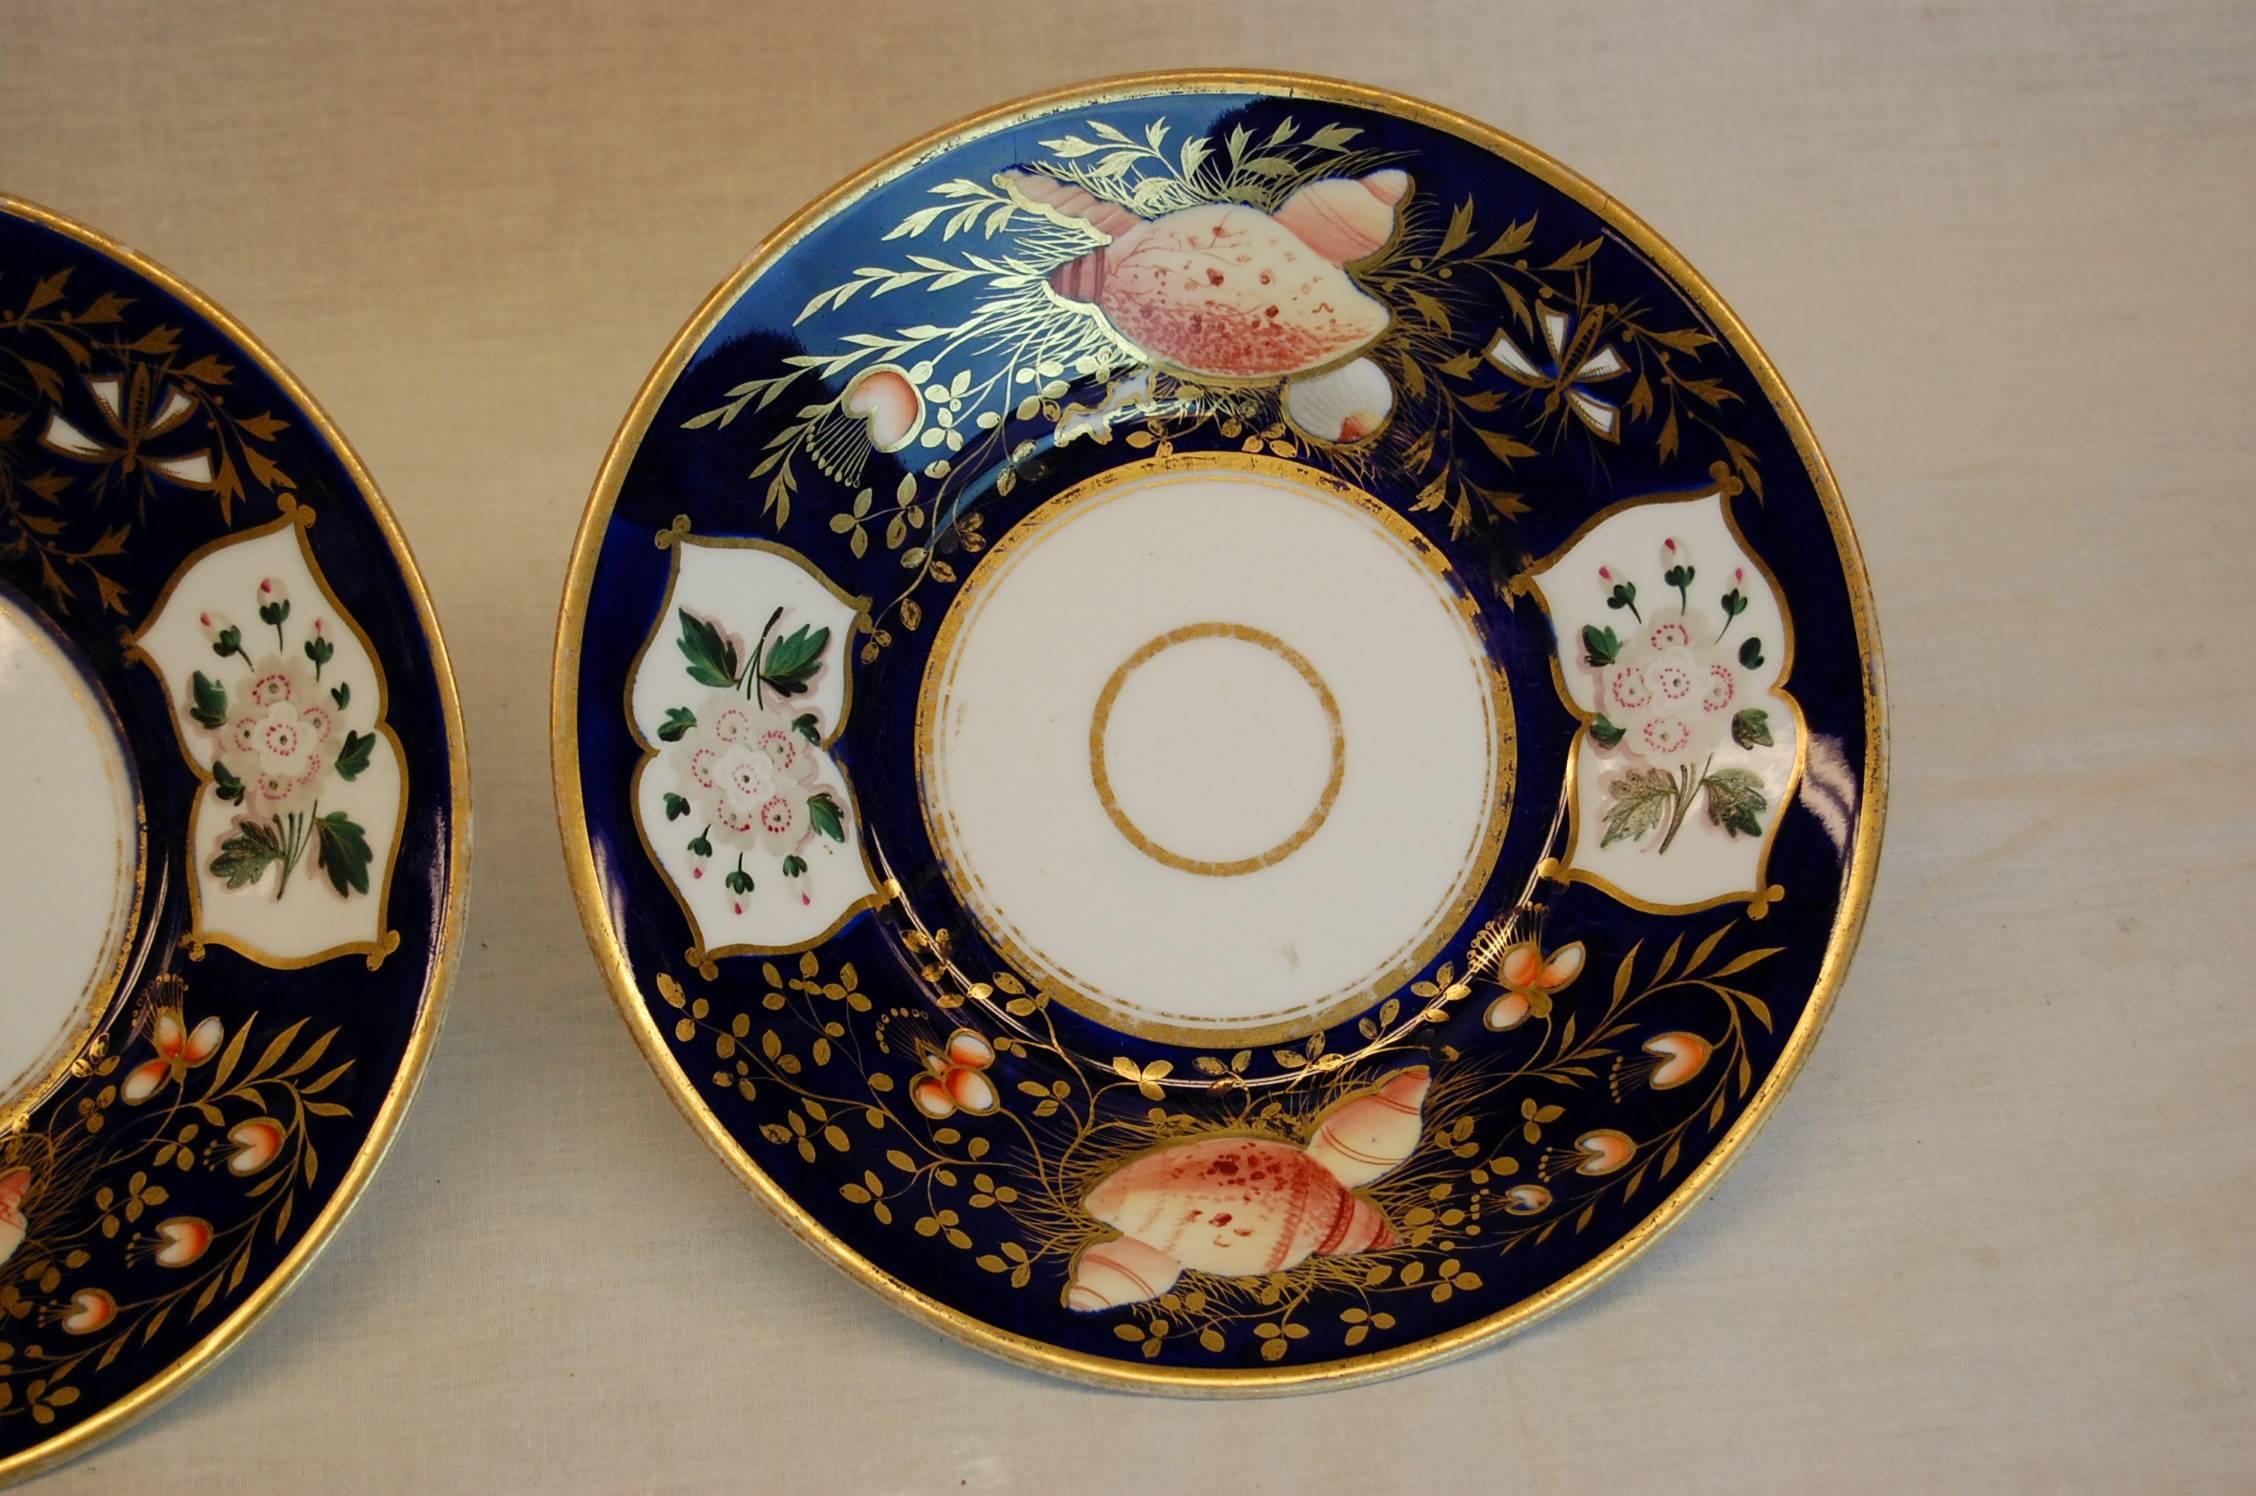 Early Victorian Pair Cobalt Blue Porcelain Plates w/ Seashell and Floral Motif, mid-19th Century